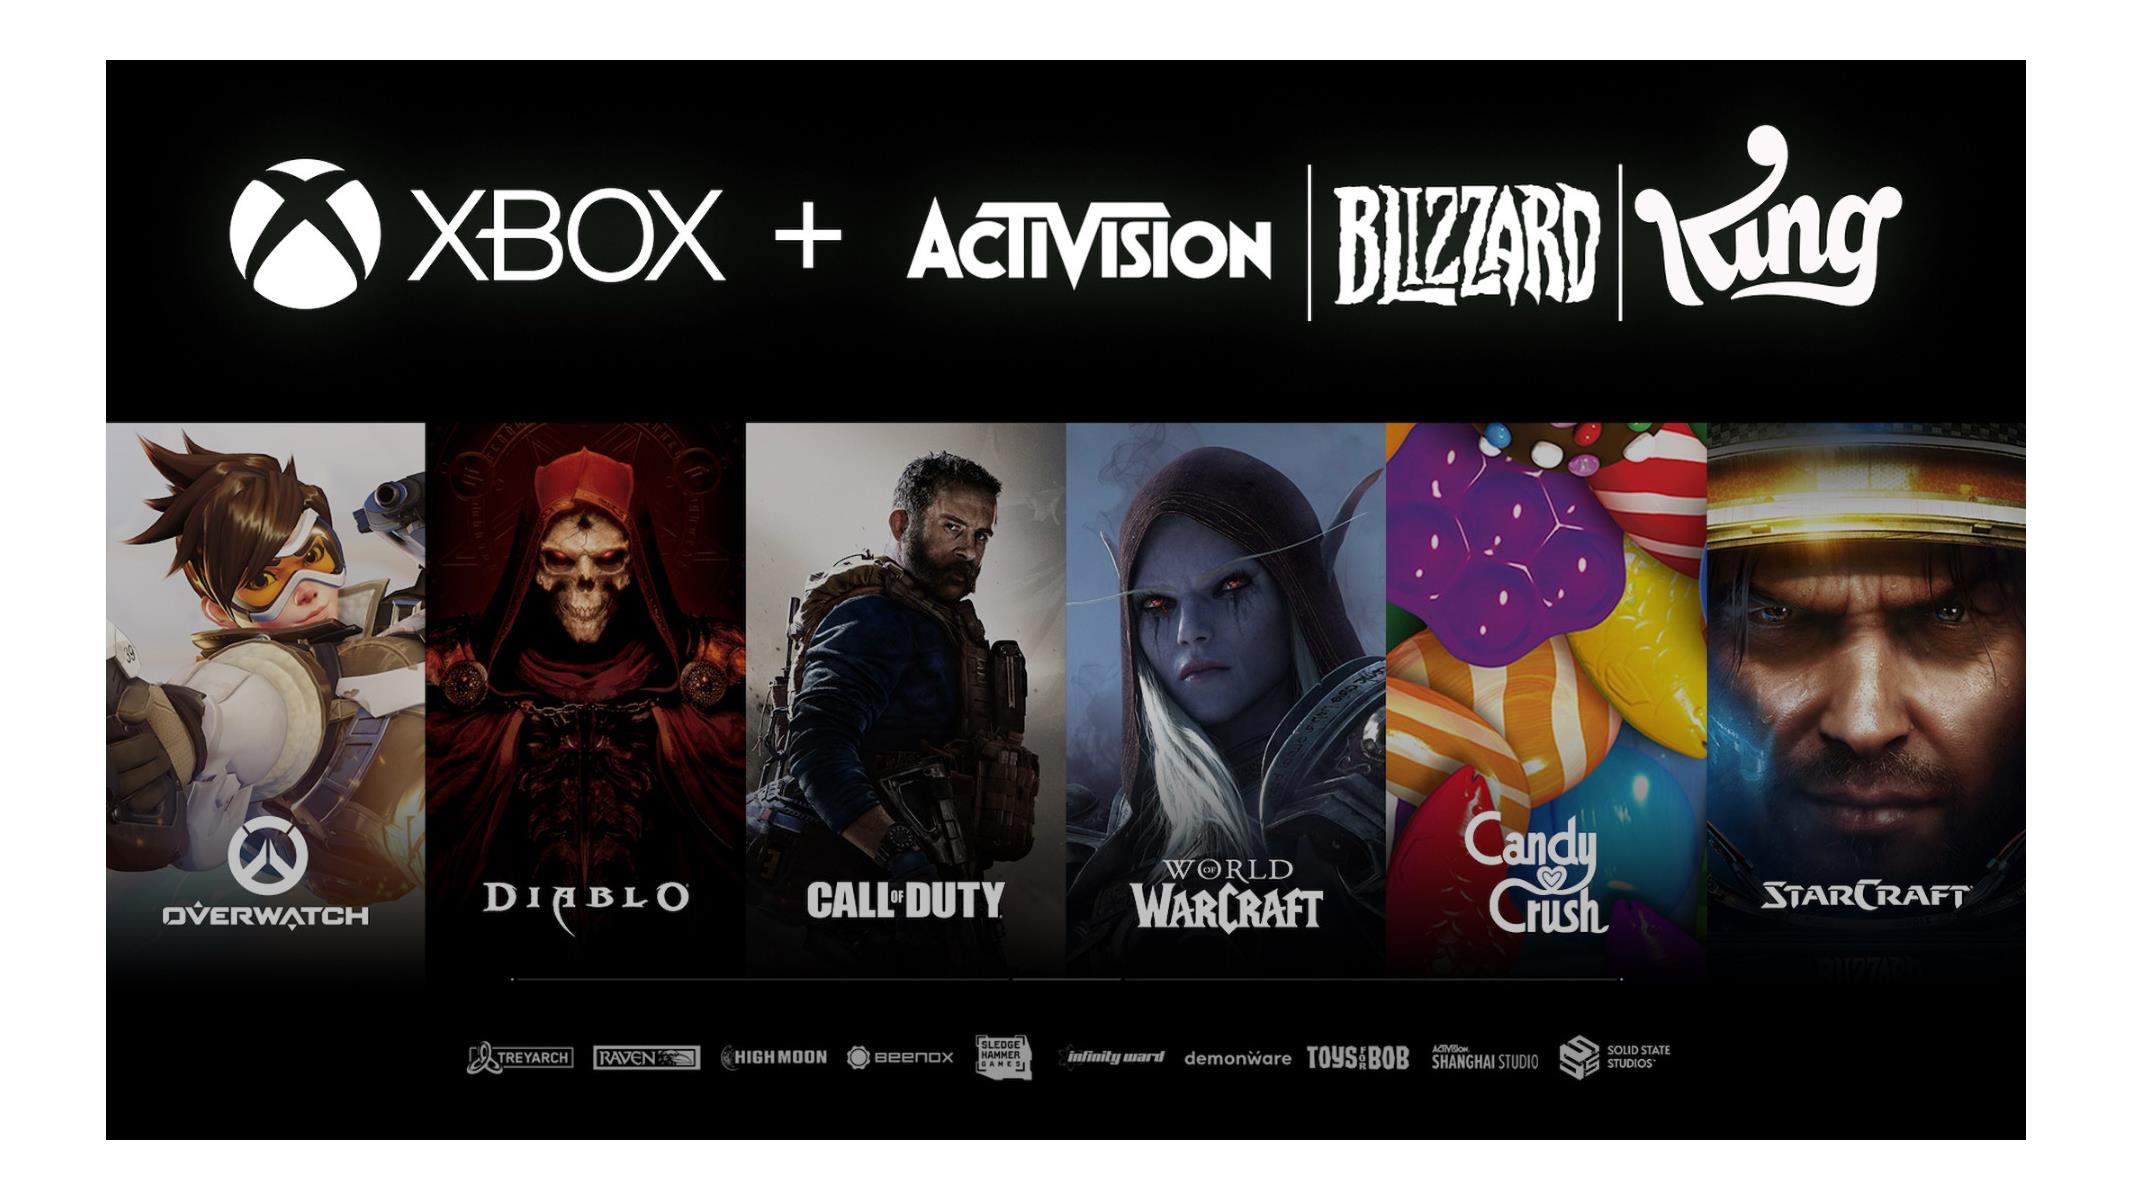 Microsoft Jacks Up Some Activision Game Prices As Much As 2402% On